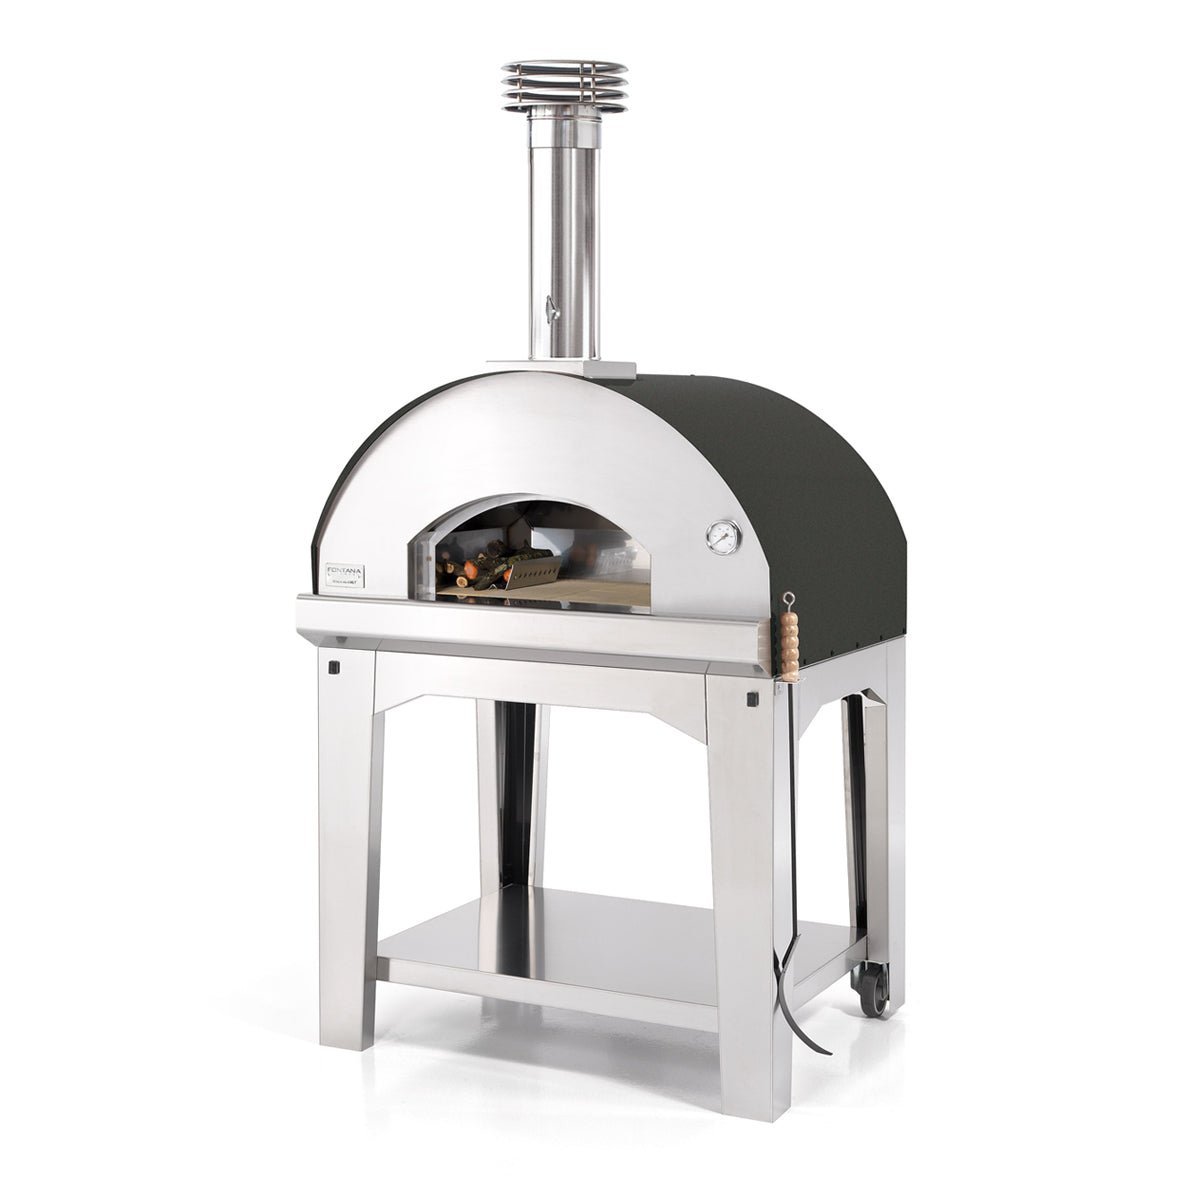 Fontana Mangiafuoco Wood-Fired Pizza Oven - Kitchen In The Garden